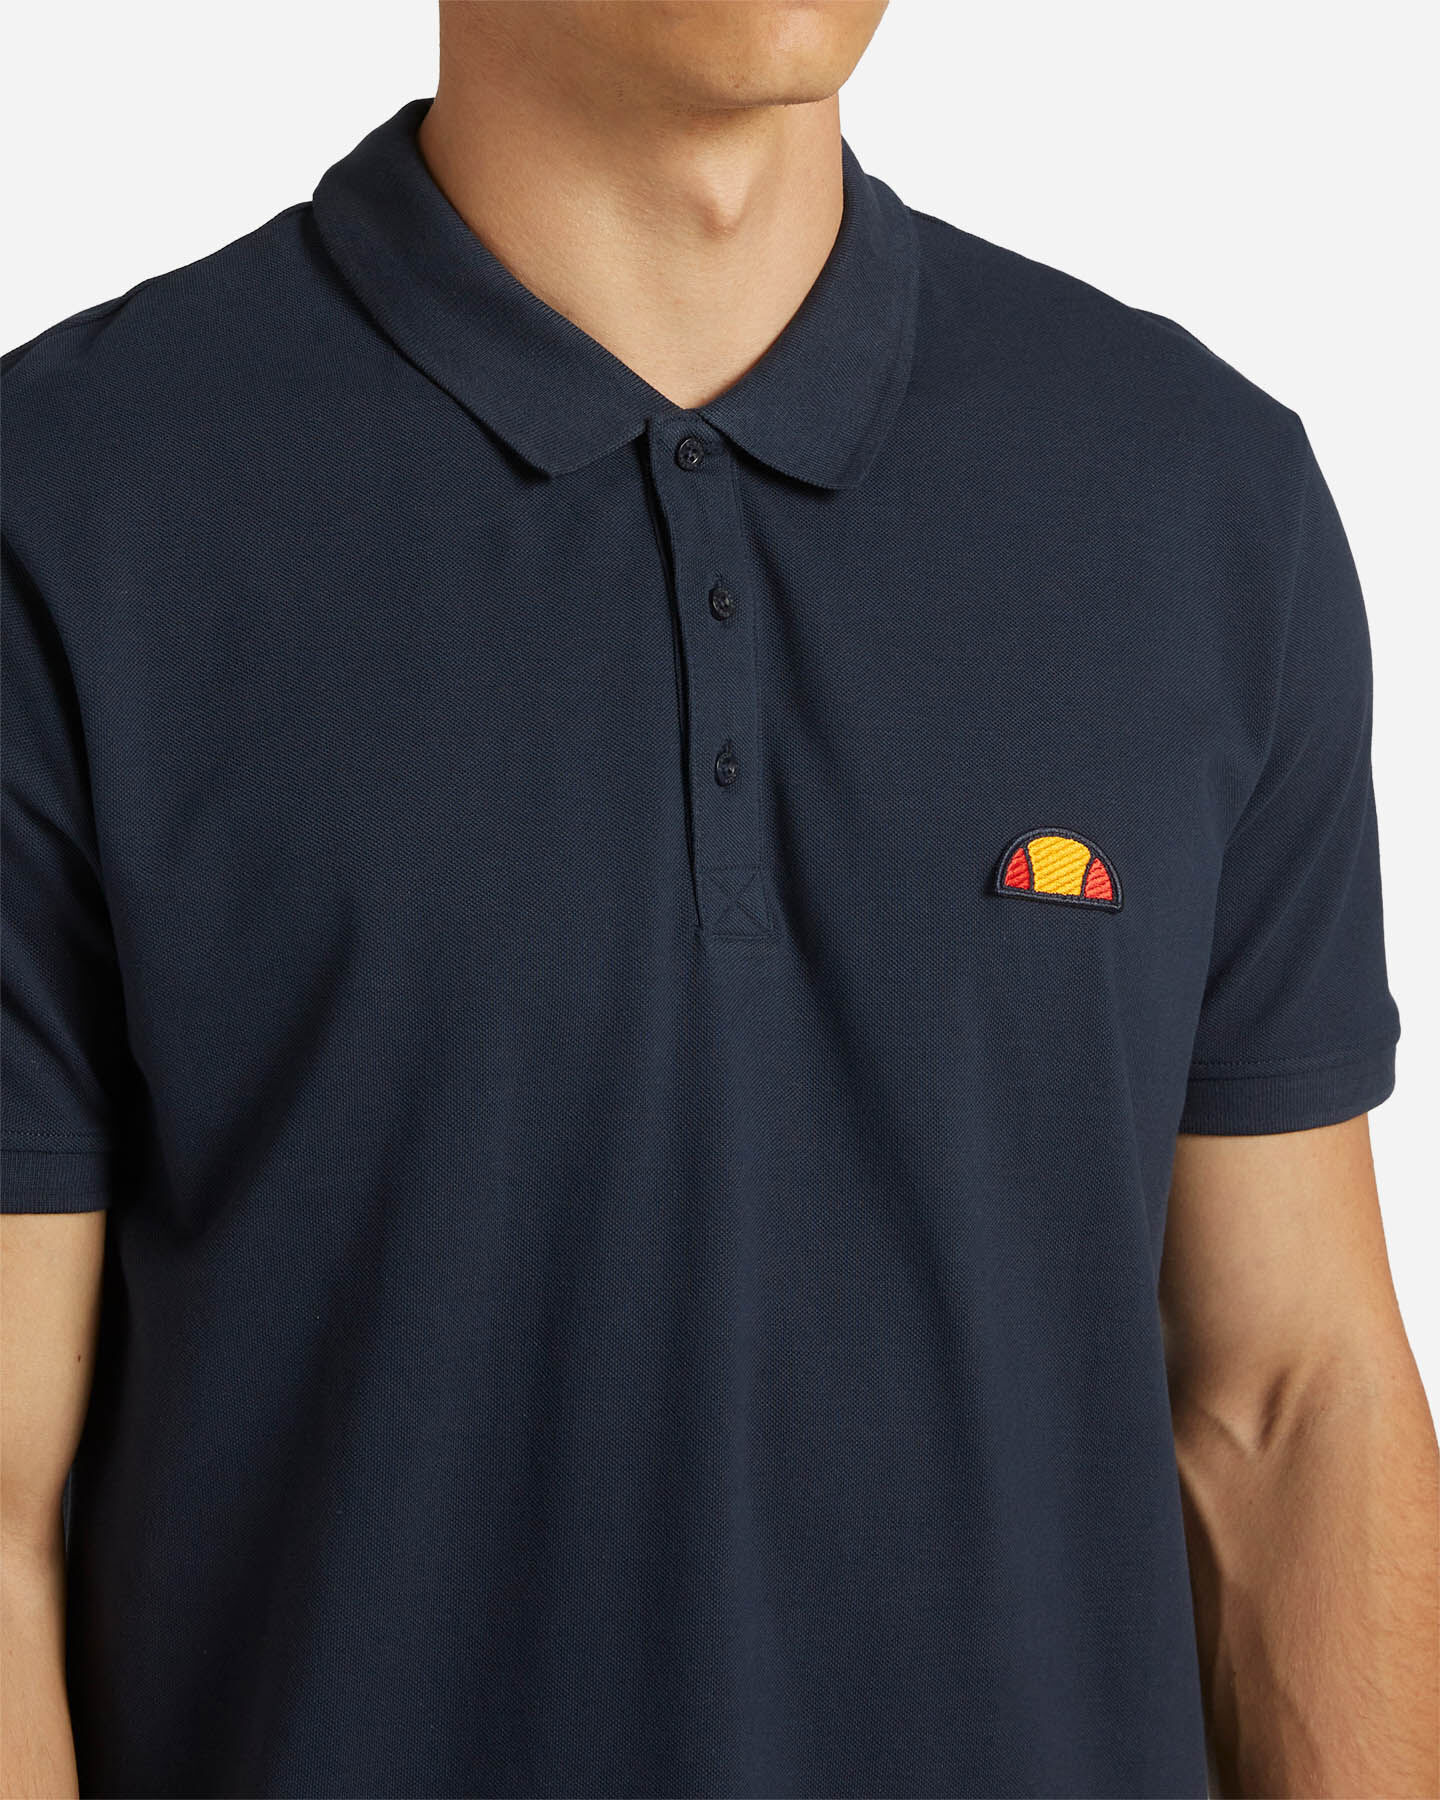  Polo ELLESSE CLASSIC PATCH M S4120101|858|S scatto 4